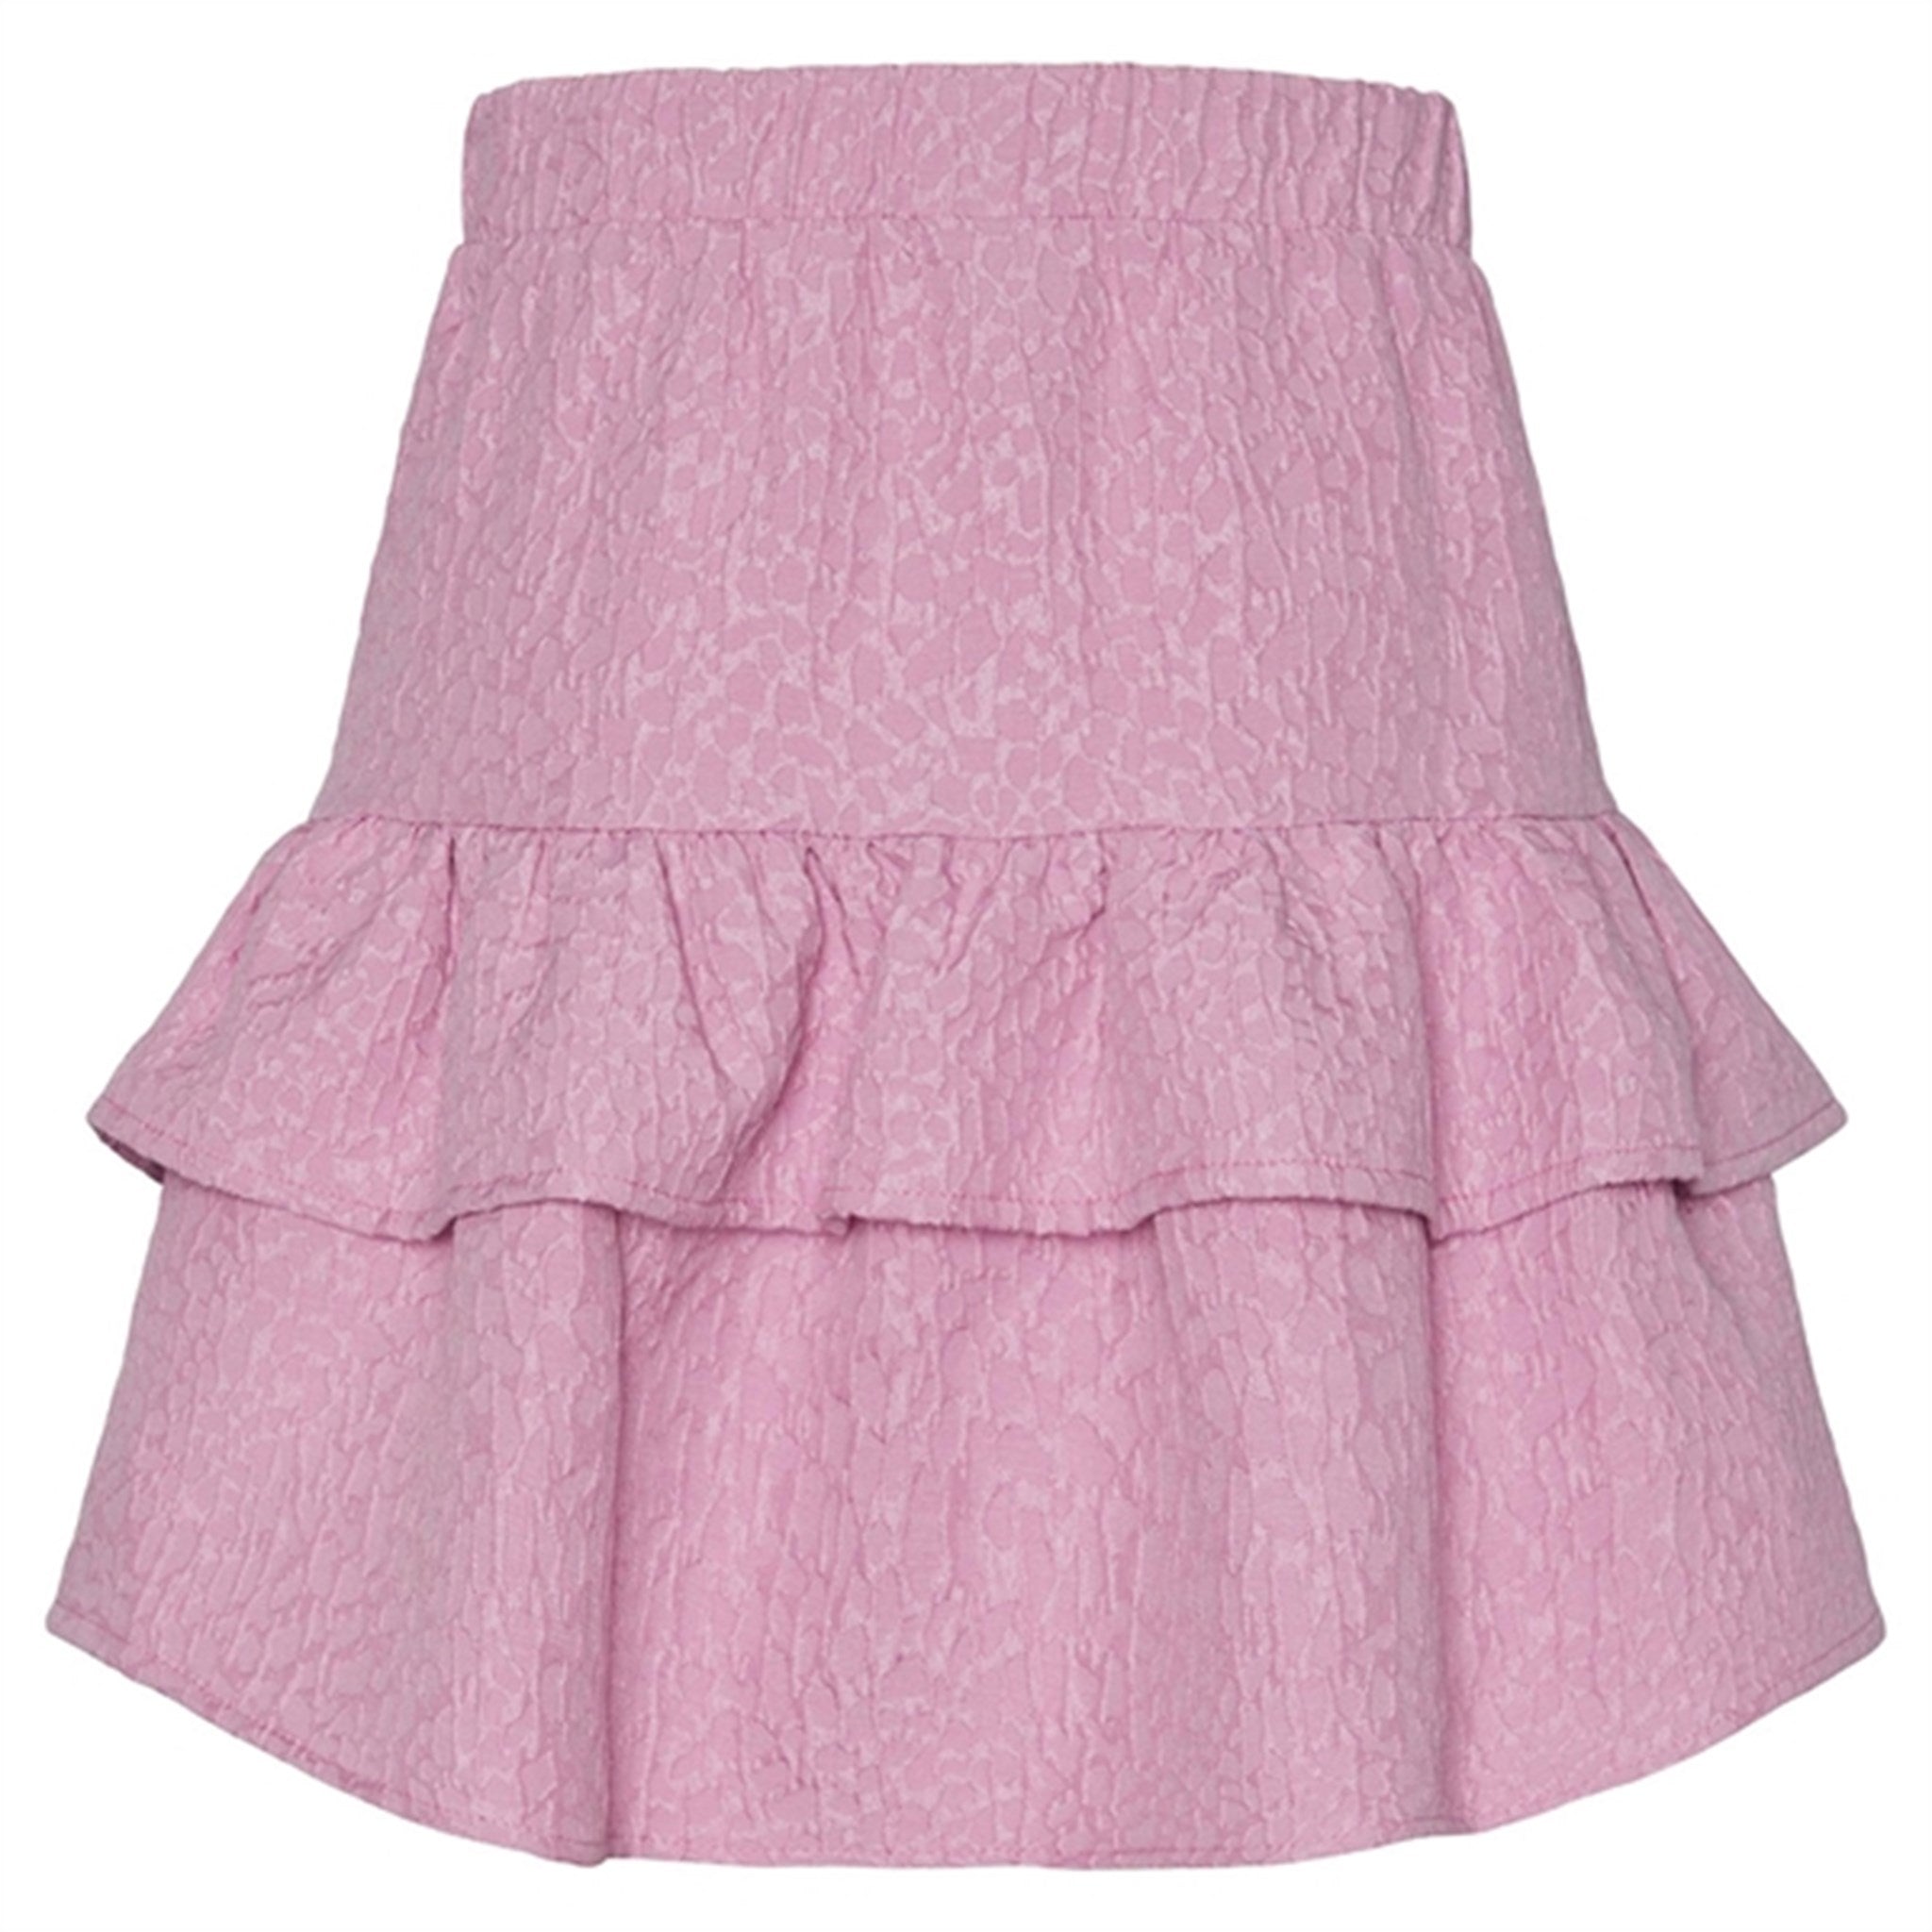 Pieces Kids Wild Orchid Carly Skirt 2